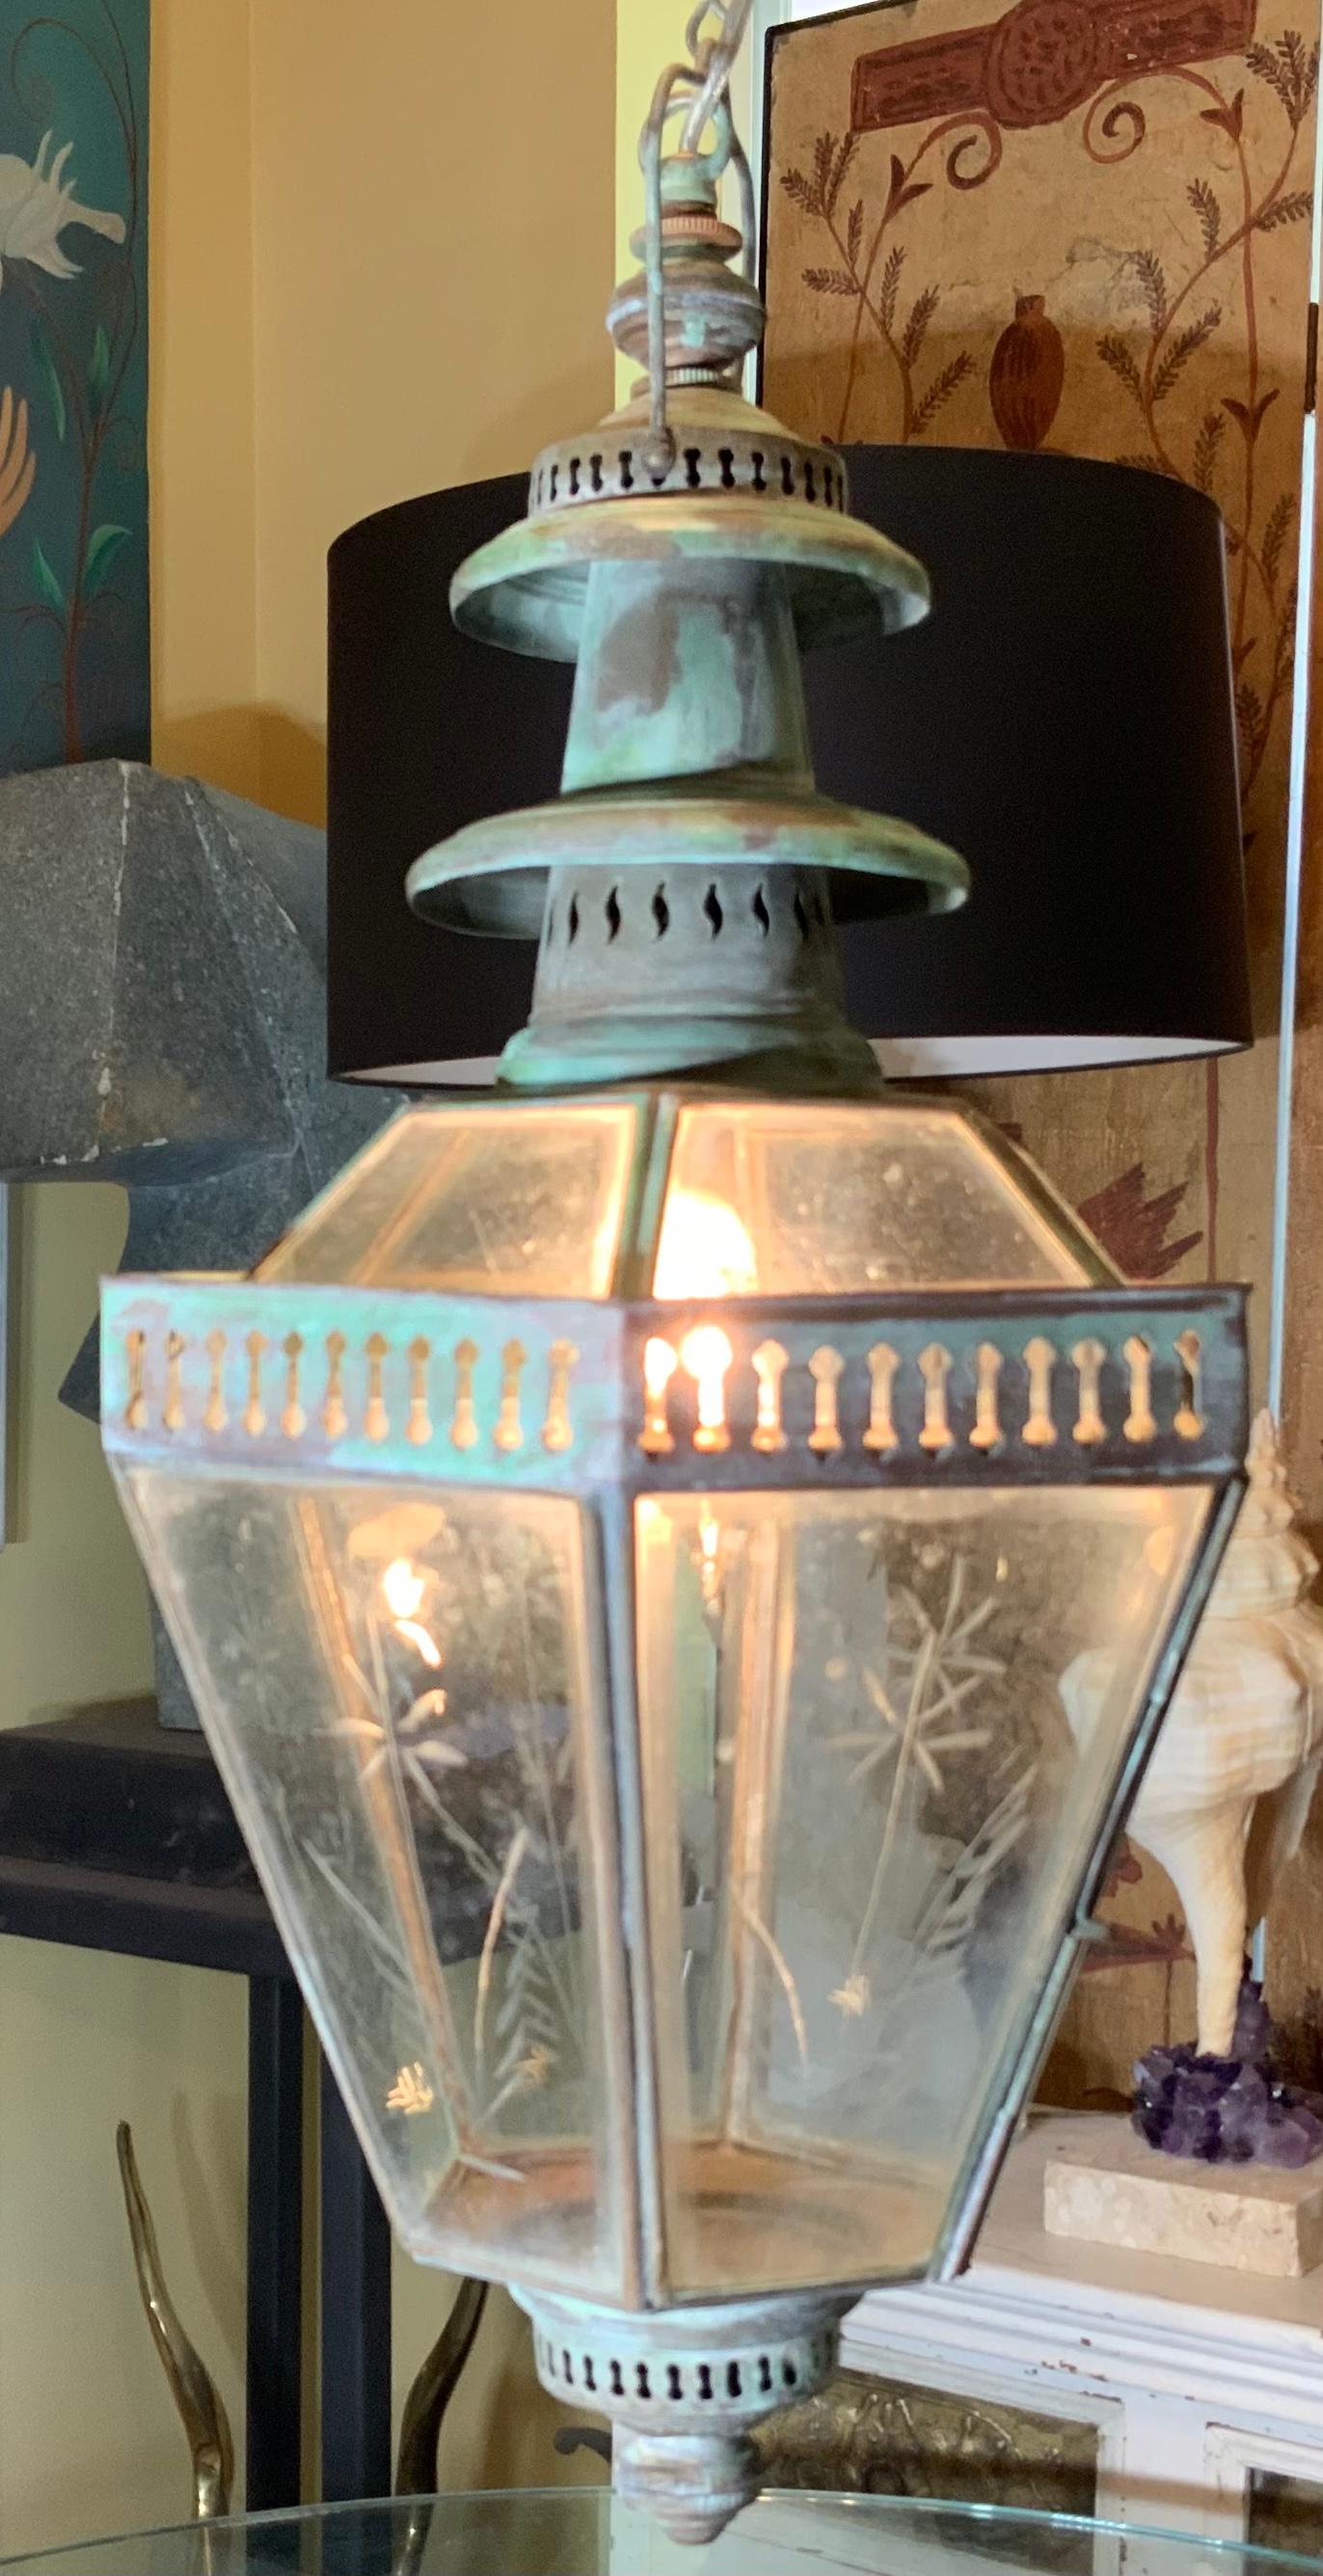 Beautiful funky hanging lantern hand crafted from copper by artisan craftsman , hand beveled glass and floral etching on it .
Newly electrified with one 60/watt light . Will look great in any room. Not suitable for wet locations.
Original chain